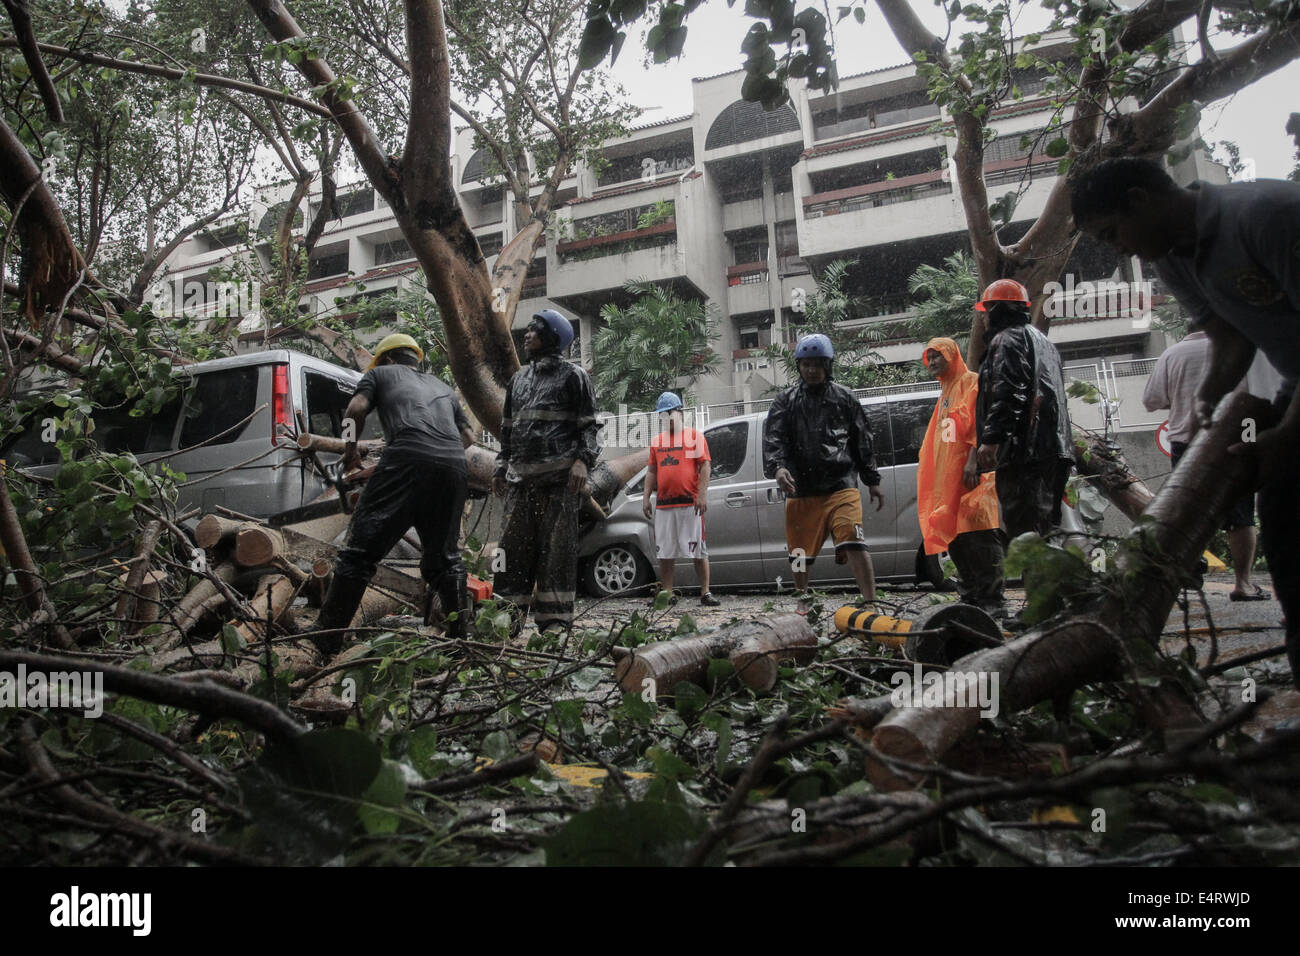 Manila, Philippines. 16th July, 2014. Local resuce workers attempt to remove debris as a tree toppled down on vehicles near a private subdivision in Makati City as Typhoon Rammasun hit Metro Manila on July 16, 2014. Typhoon Rammasun (locally known as Glenda) had maximum sustained winds of 150 kph and gustiness of up to 185 kph when it hit Metro Manila. Across the country, about 400,000 people had fled their homes and sheltered in evacuation centers, according to the disaster management council. Credit:  ZUMA Press, Inc./Alamy Live News Stock Photo